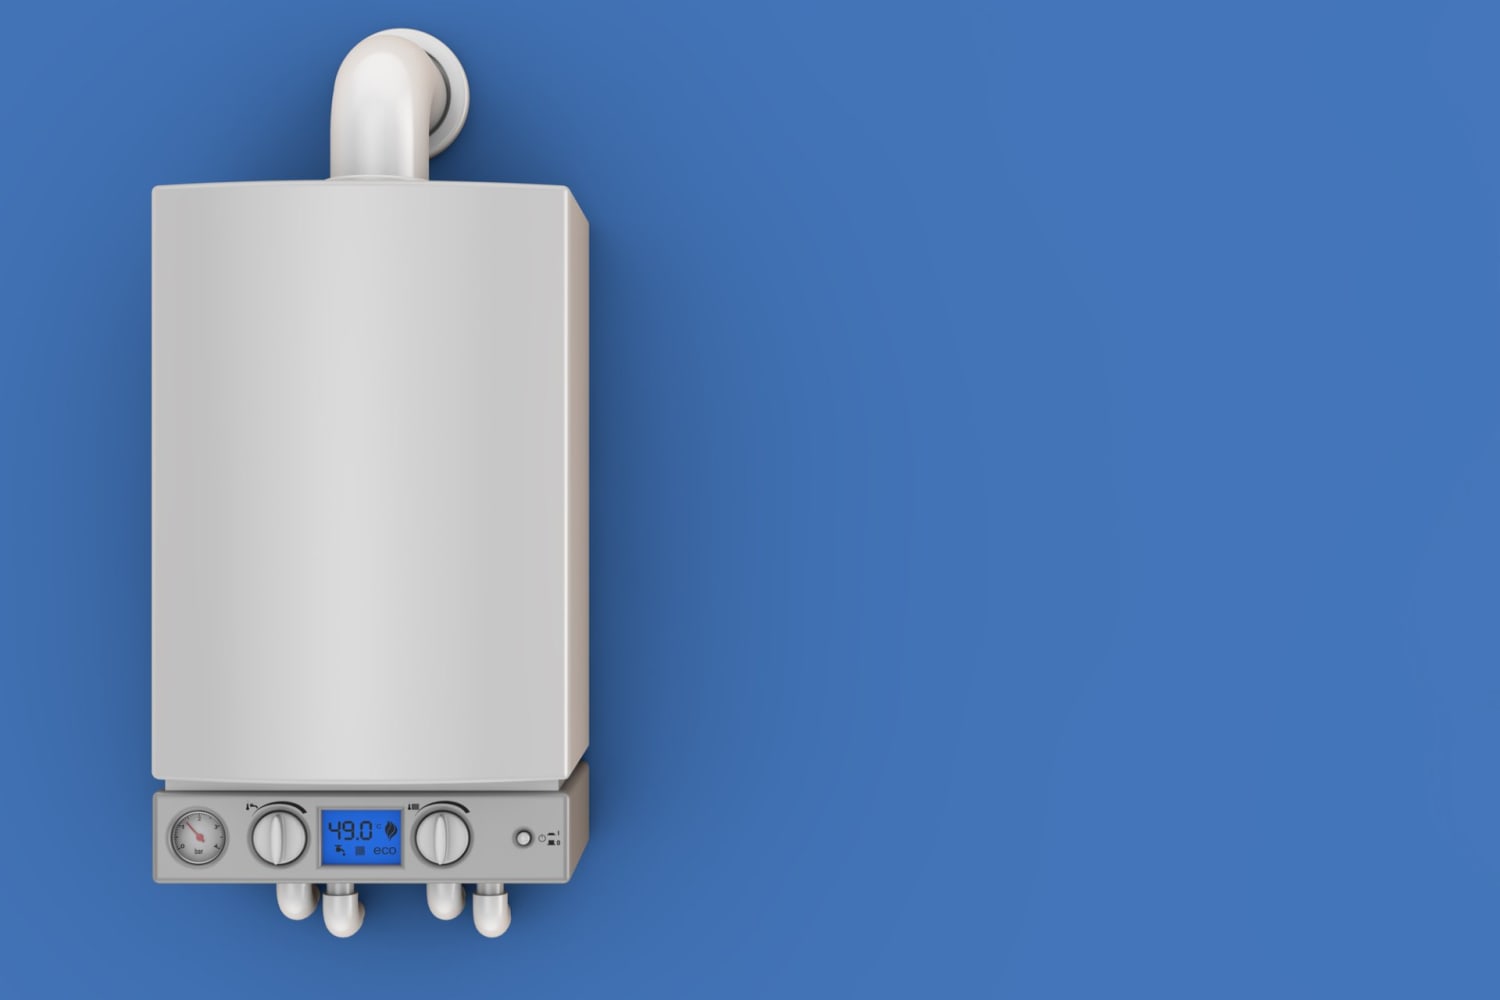 Boiler Vs Water Heater - What's the Difference?